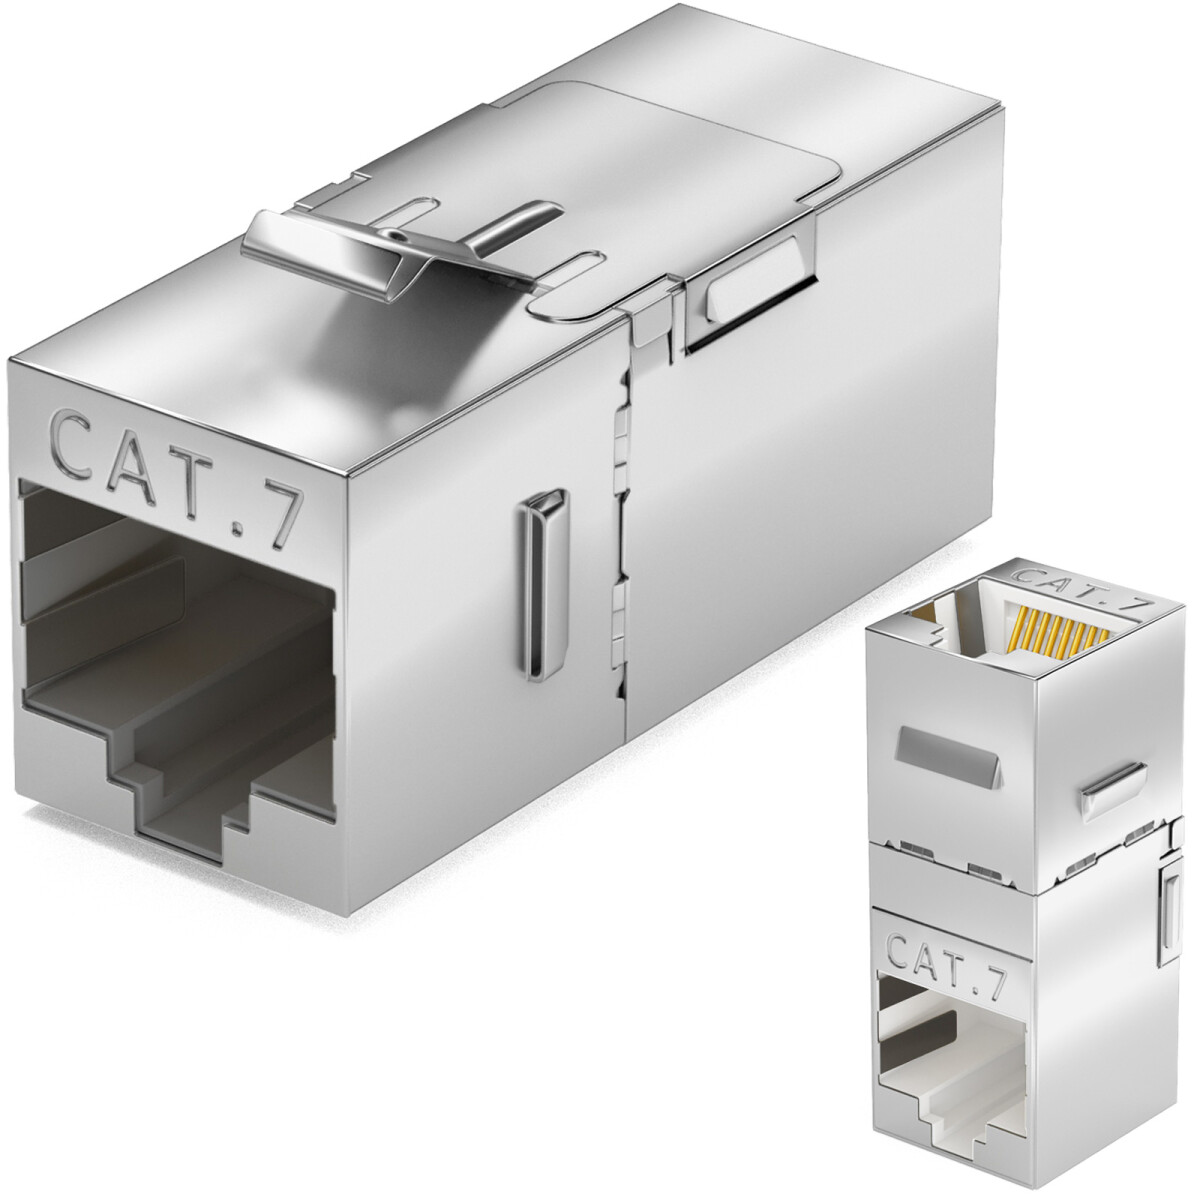 ▷【RJ45 keystone module CAT 7 angle adapter connector】at hb